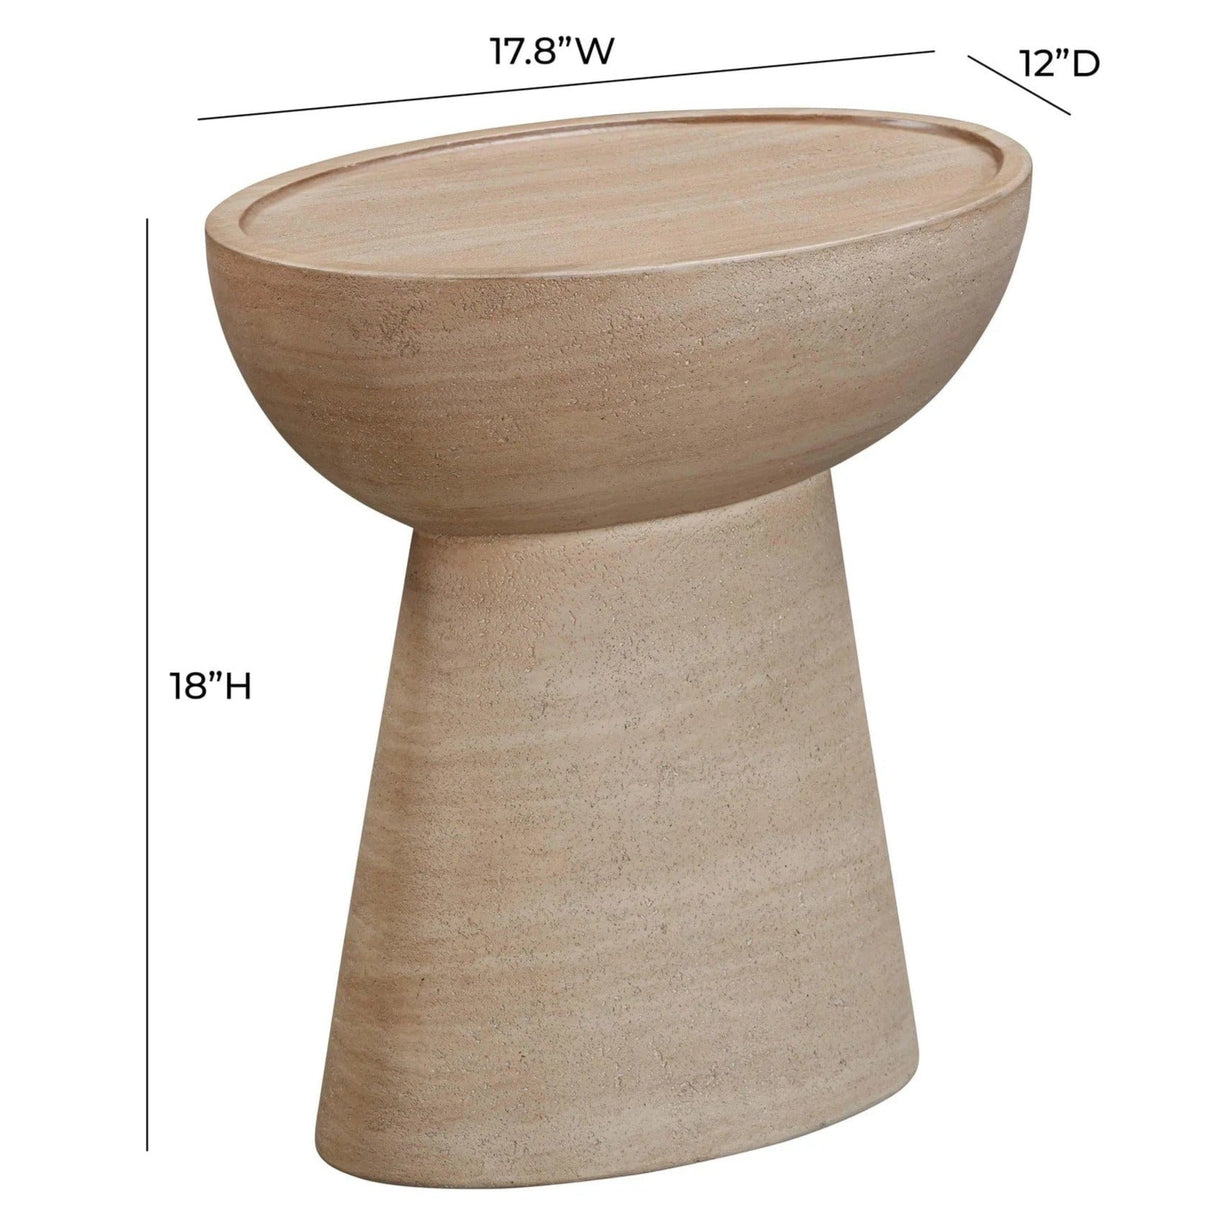 Candelabra Home Eclipse Textured Faux Travertine Indoor/Outdoor Side Table Side Tables TOV-O54274